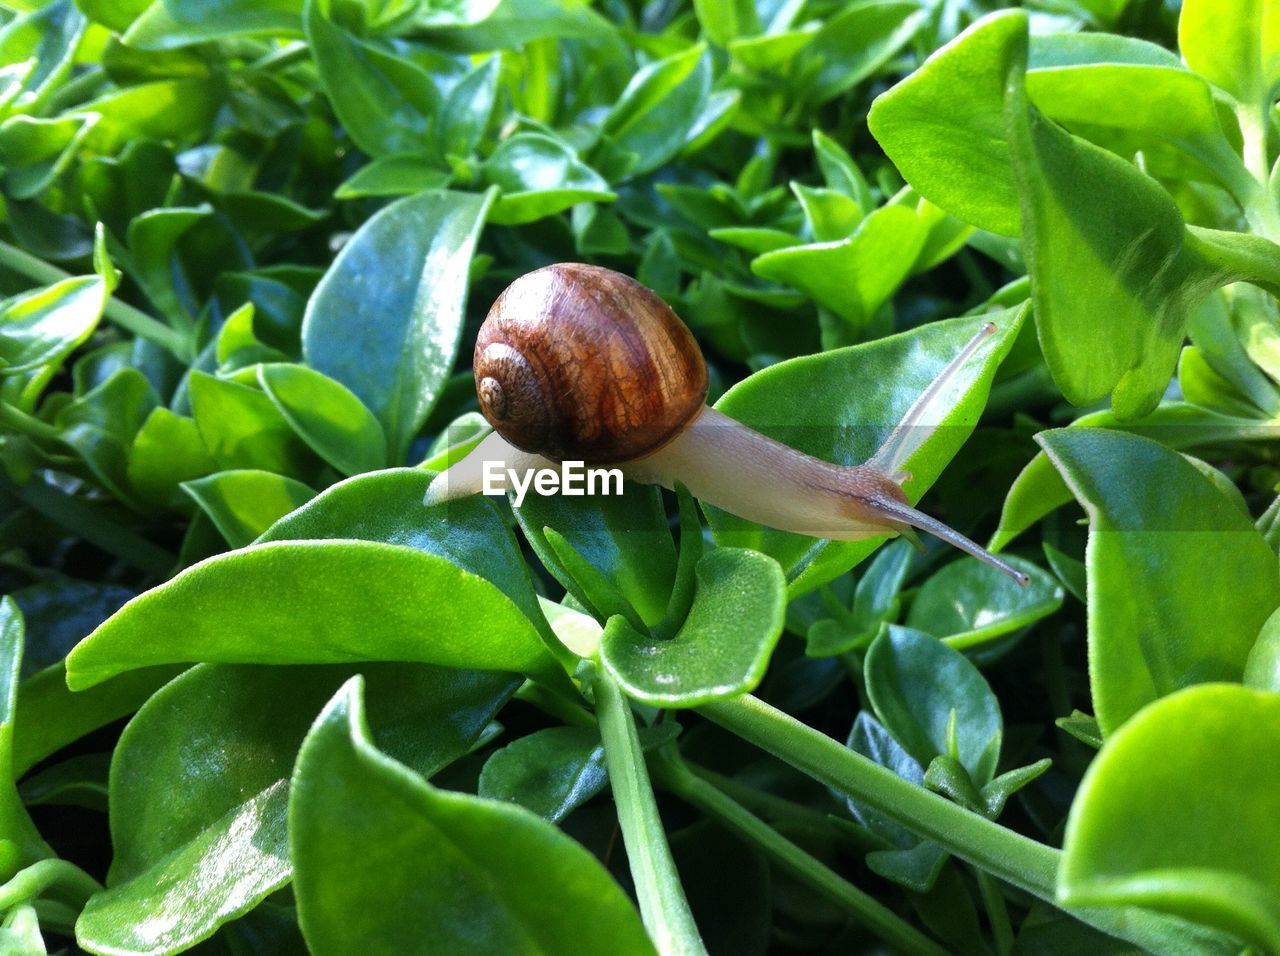 CLOSE-UP OF SNAIL ON PLANTS